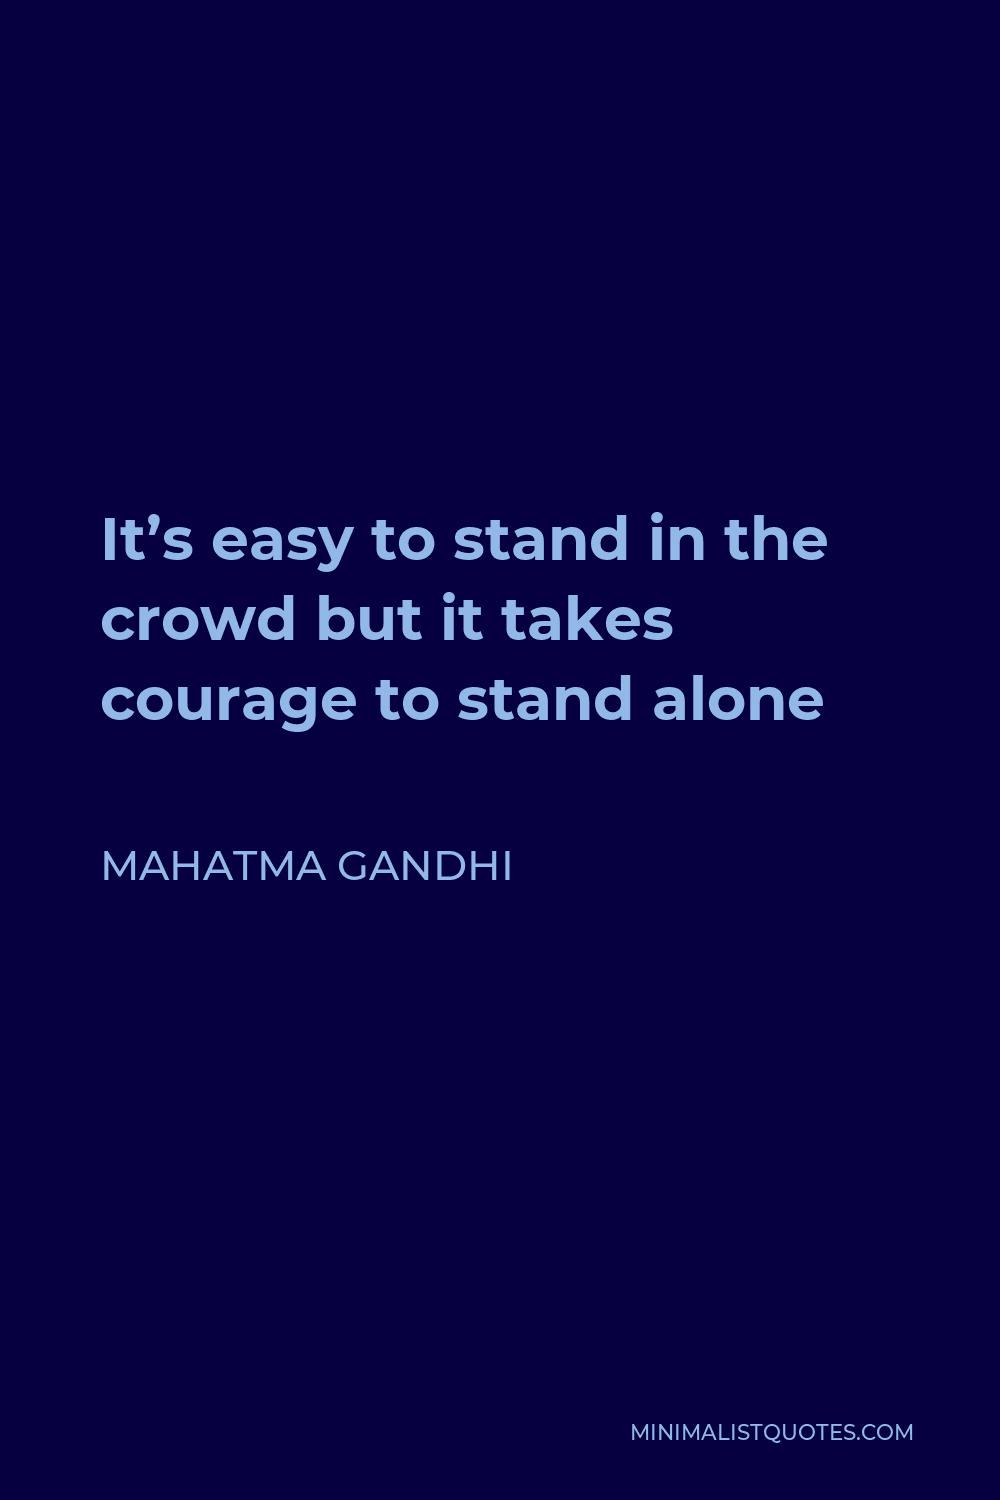 Mahatma Gandhi Quote - It’s easy to stand in the crowd but it takes courage to stand alone